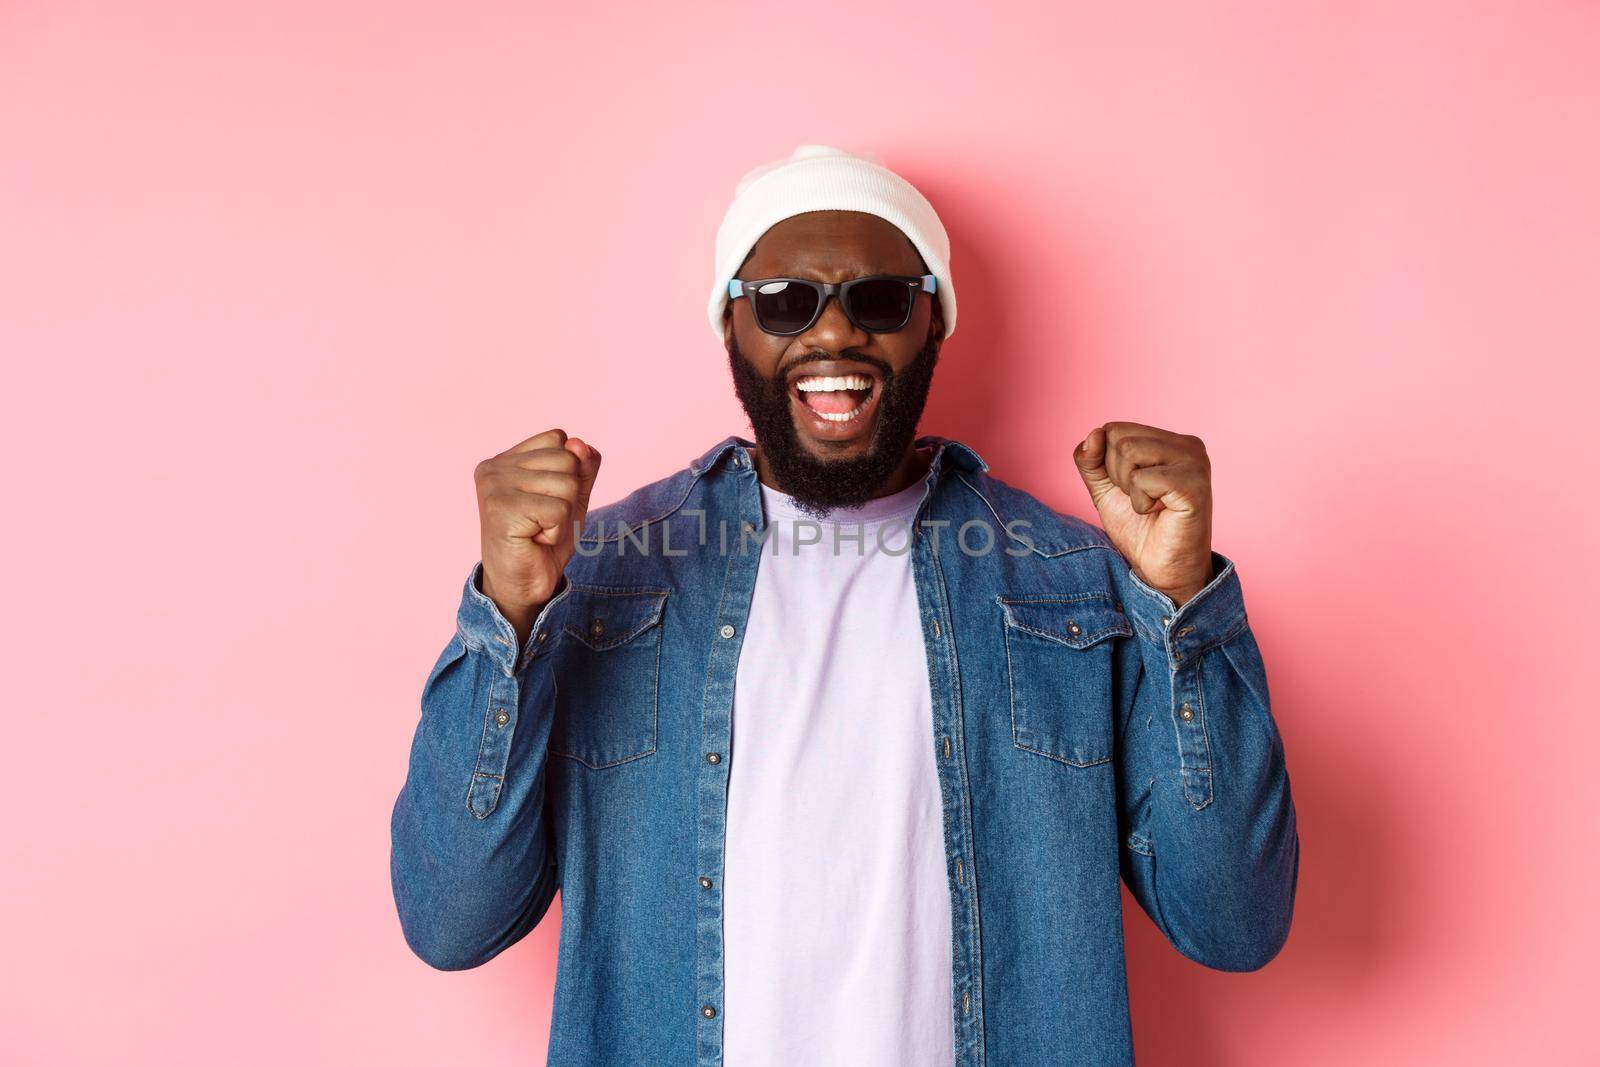 Satisfied african-american man in sunglasses saying yes, triumphing and making fist pumps in rejoice, celebrating achievement, standing like winner over pink background.